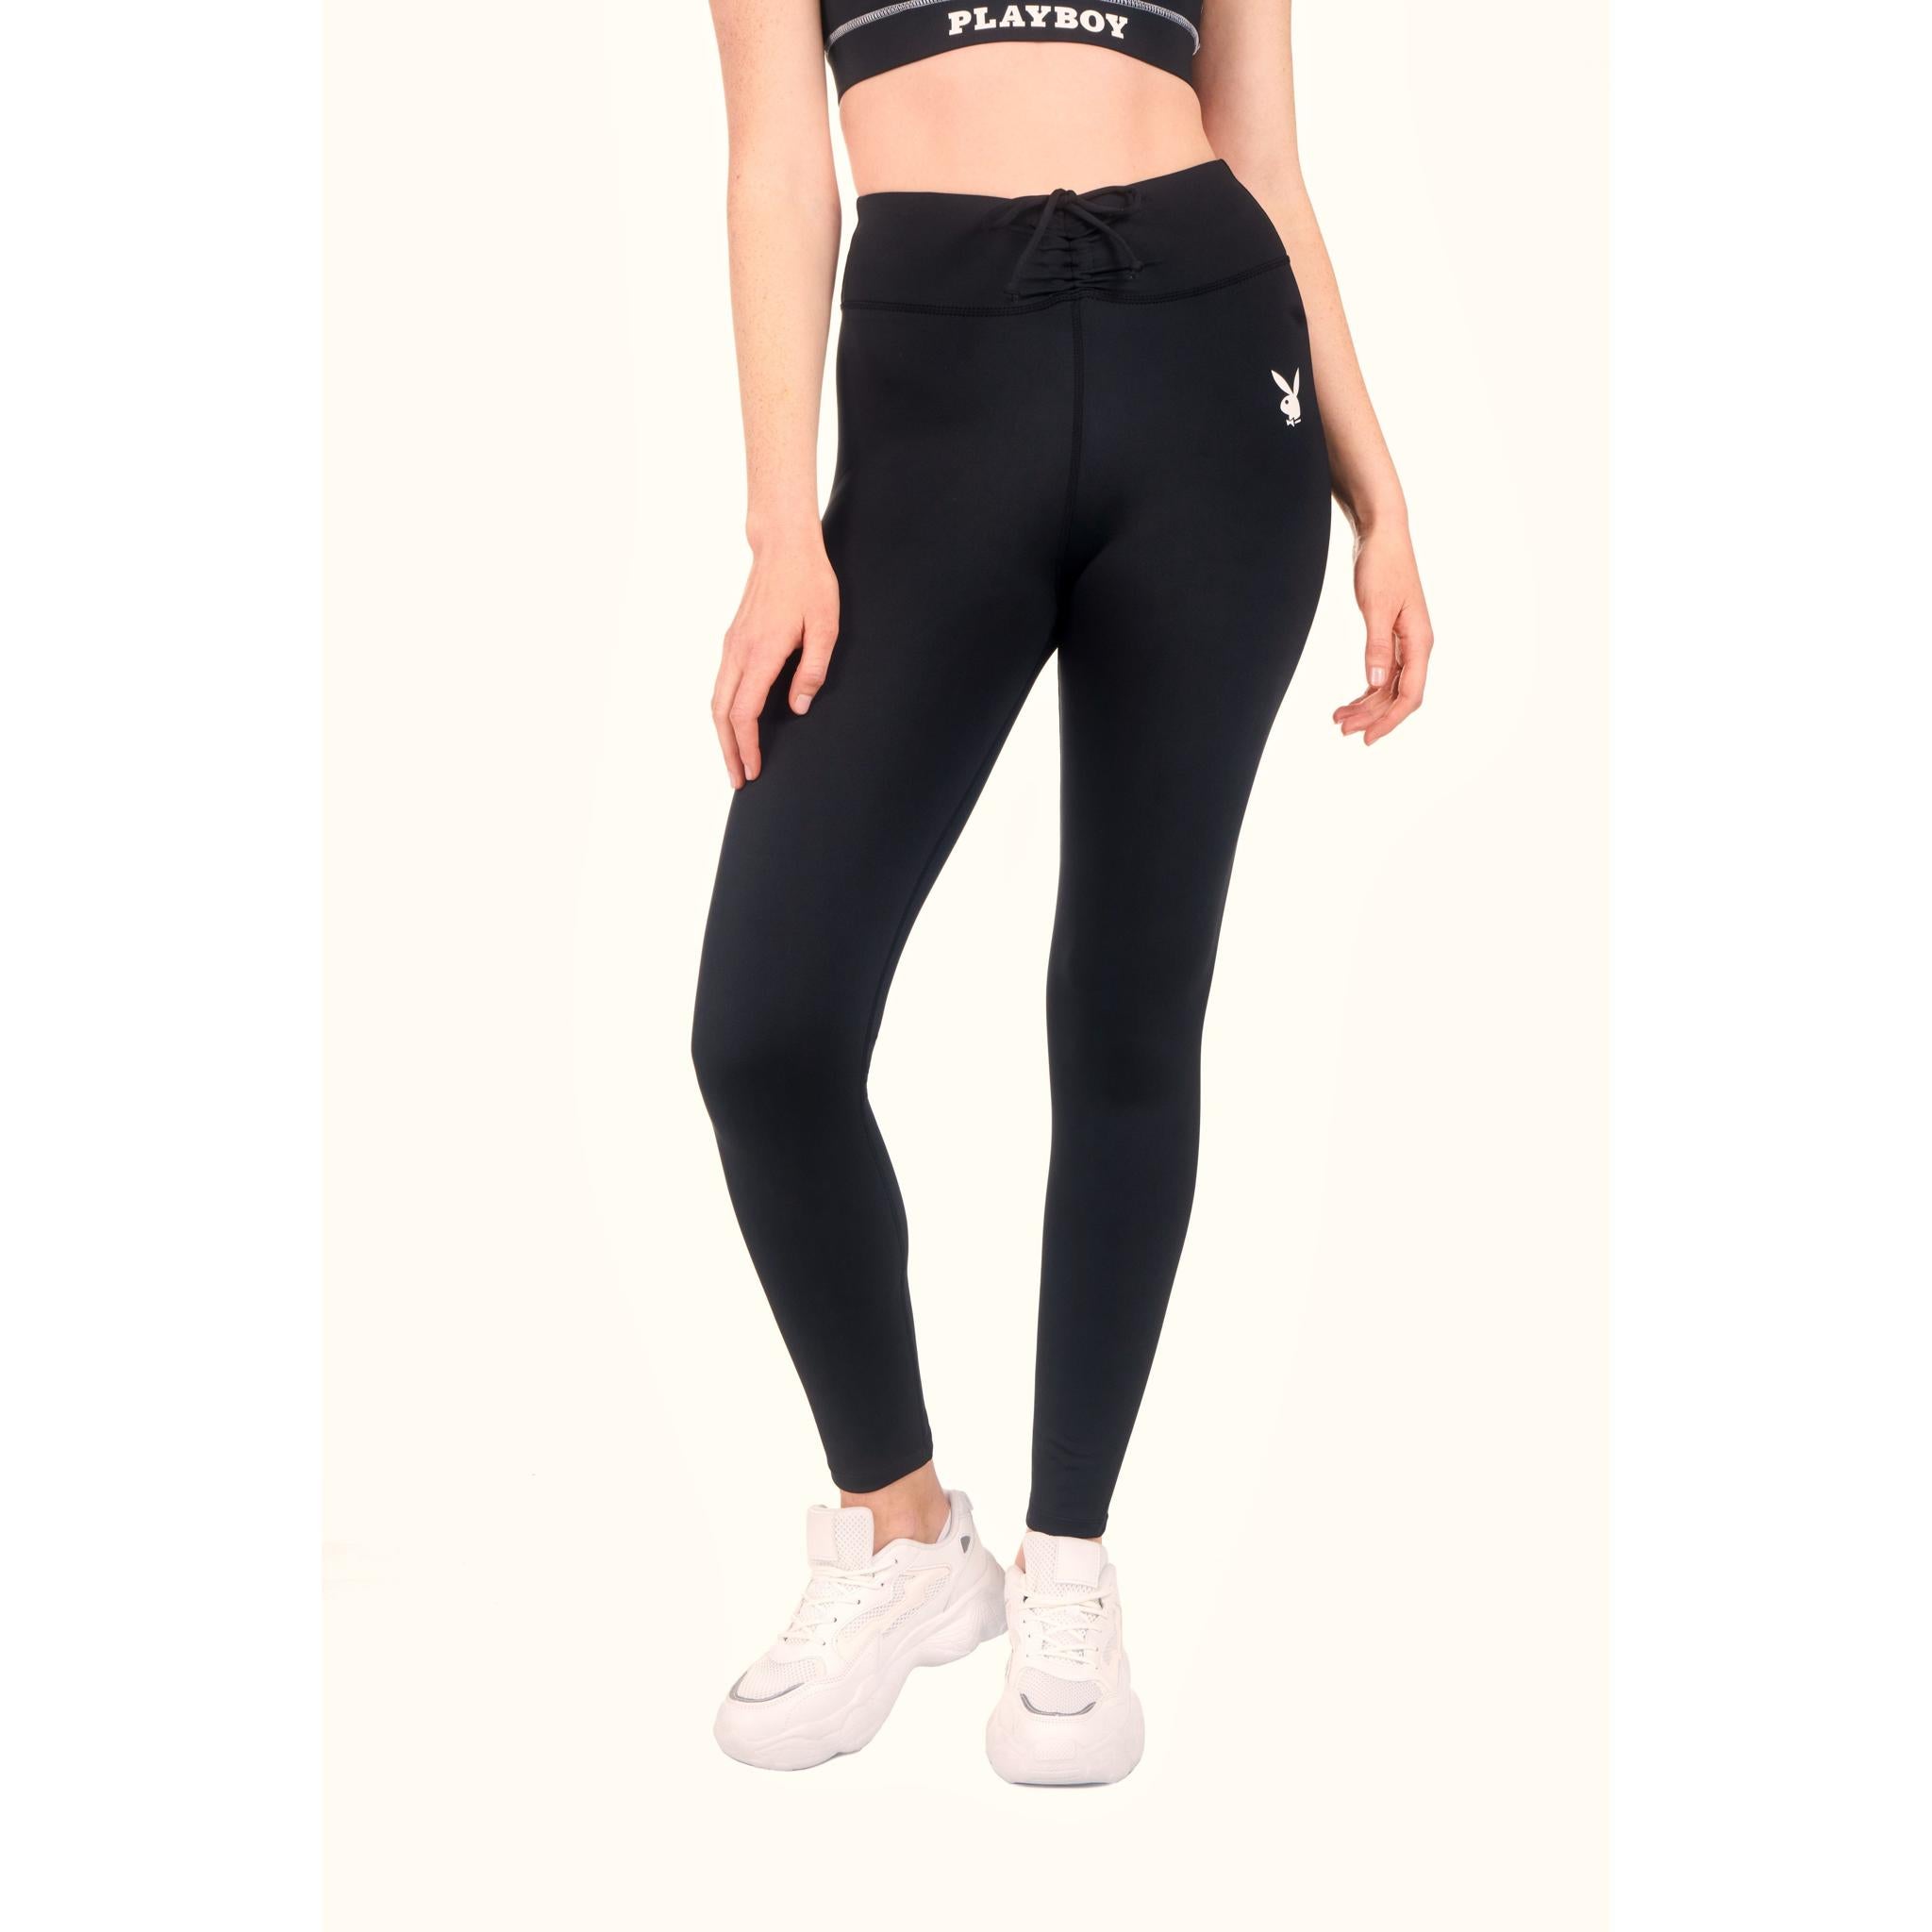 Ruched Waistband Leggings: Chic Playboy Women's Active Wear